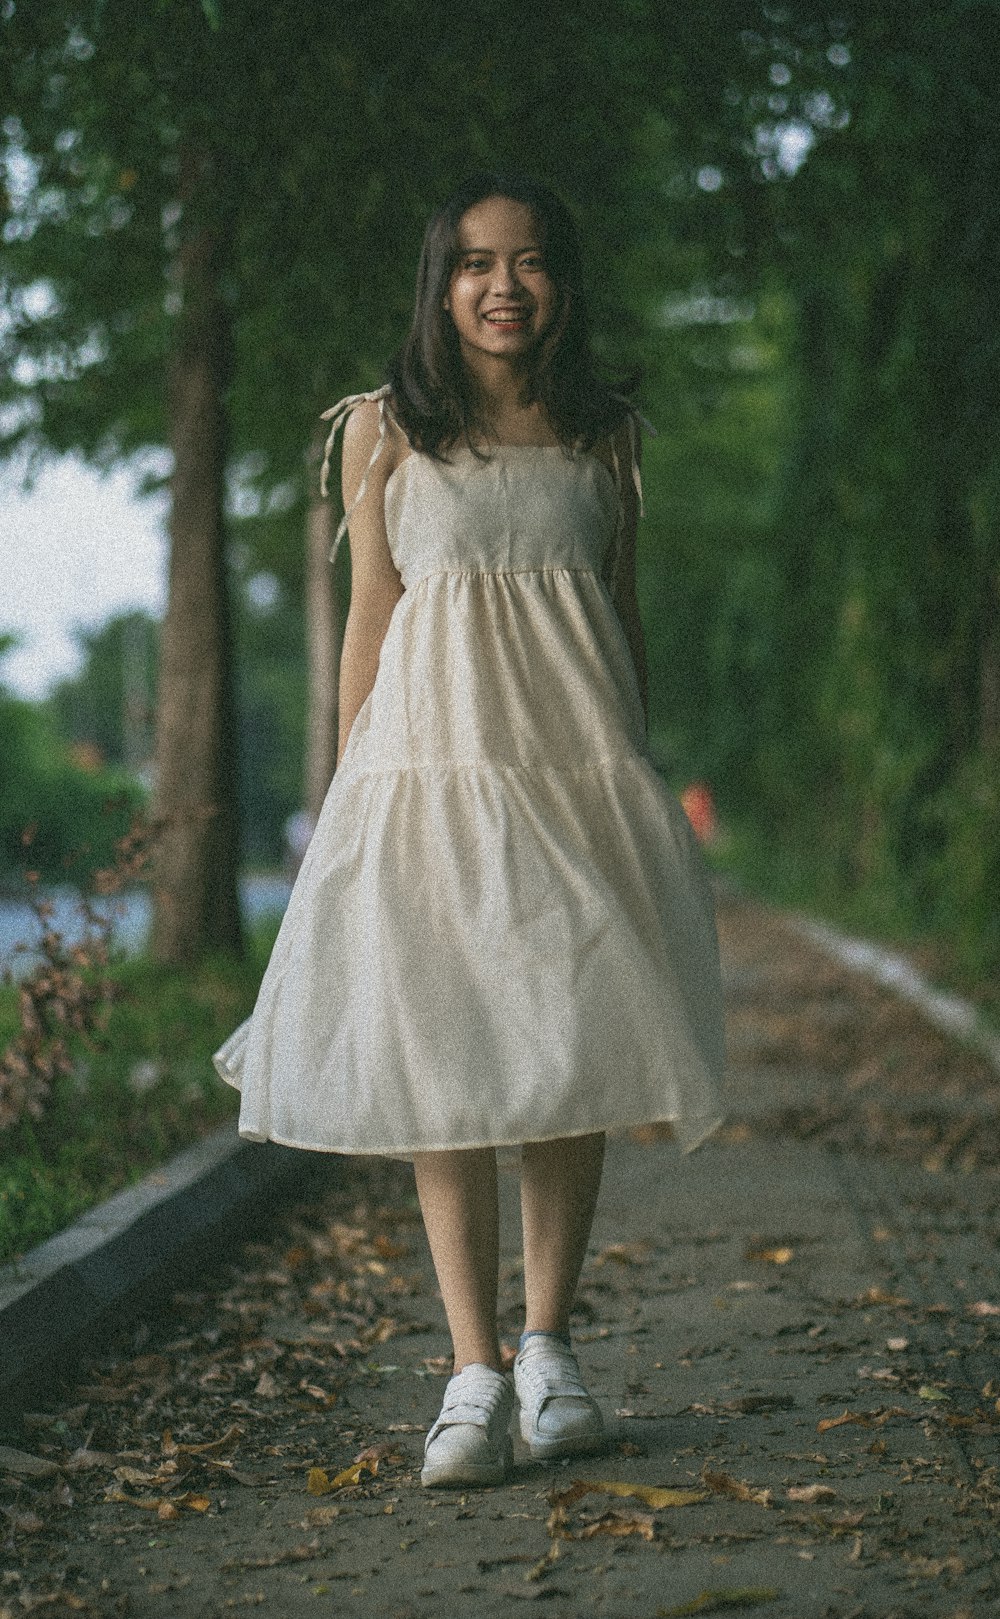 woman in white spaghetti strap dress standing on gray concrete pathway during daytime